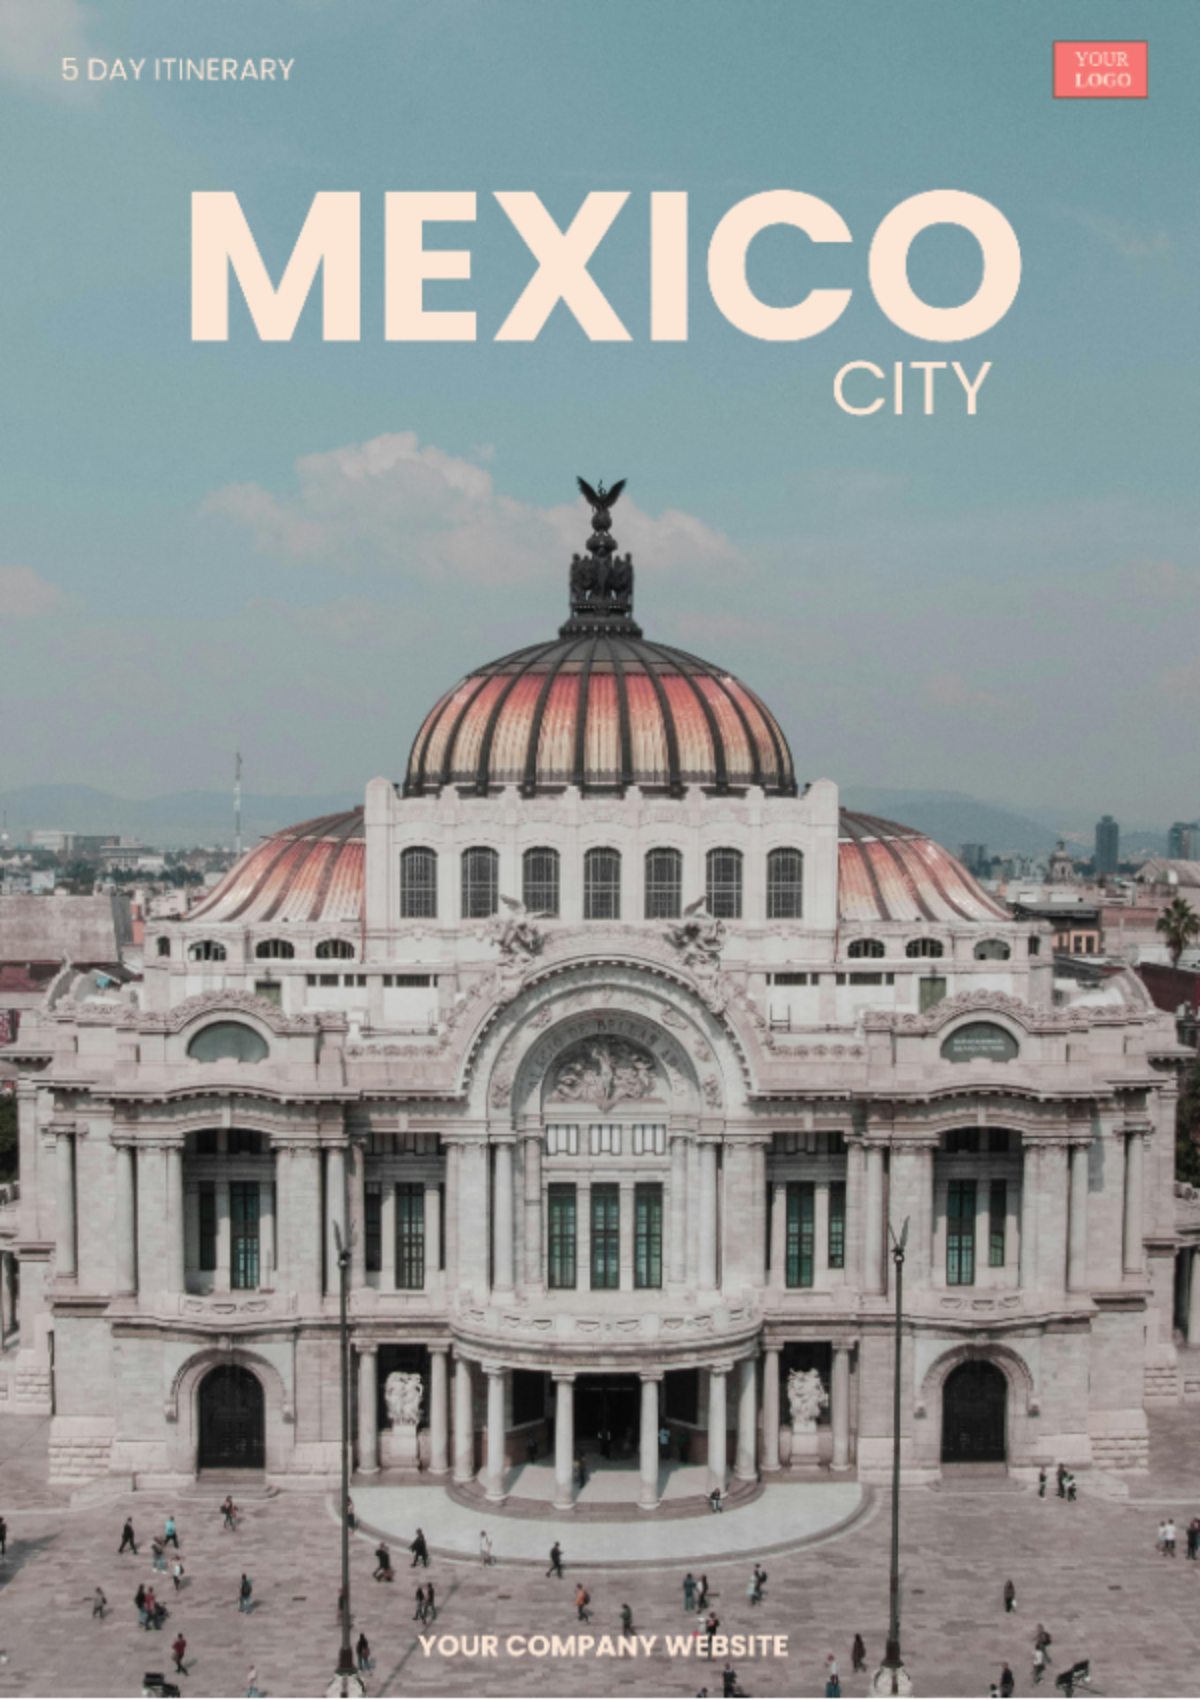 Free 5 Day Mexico City Itinerary Template